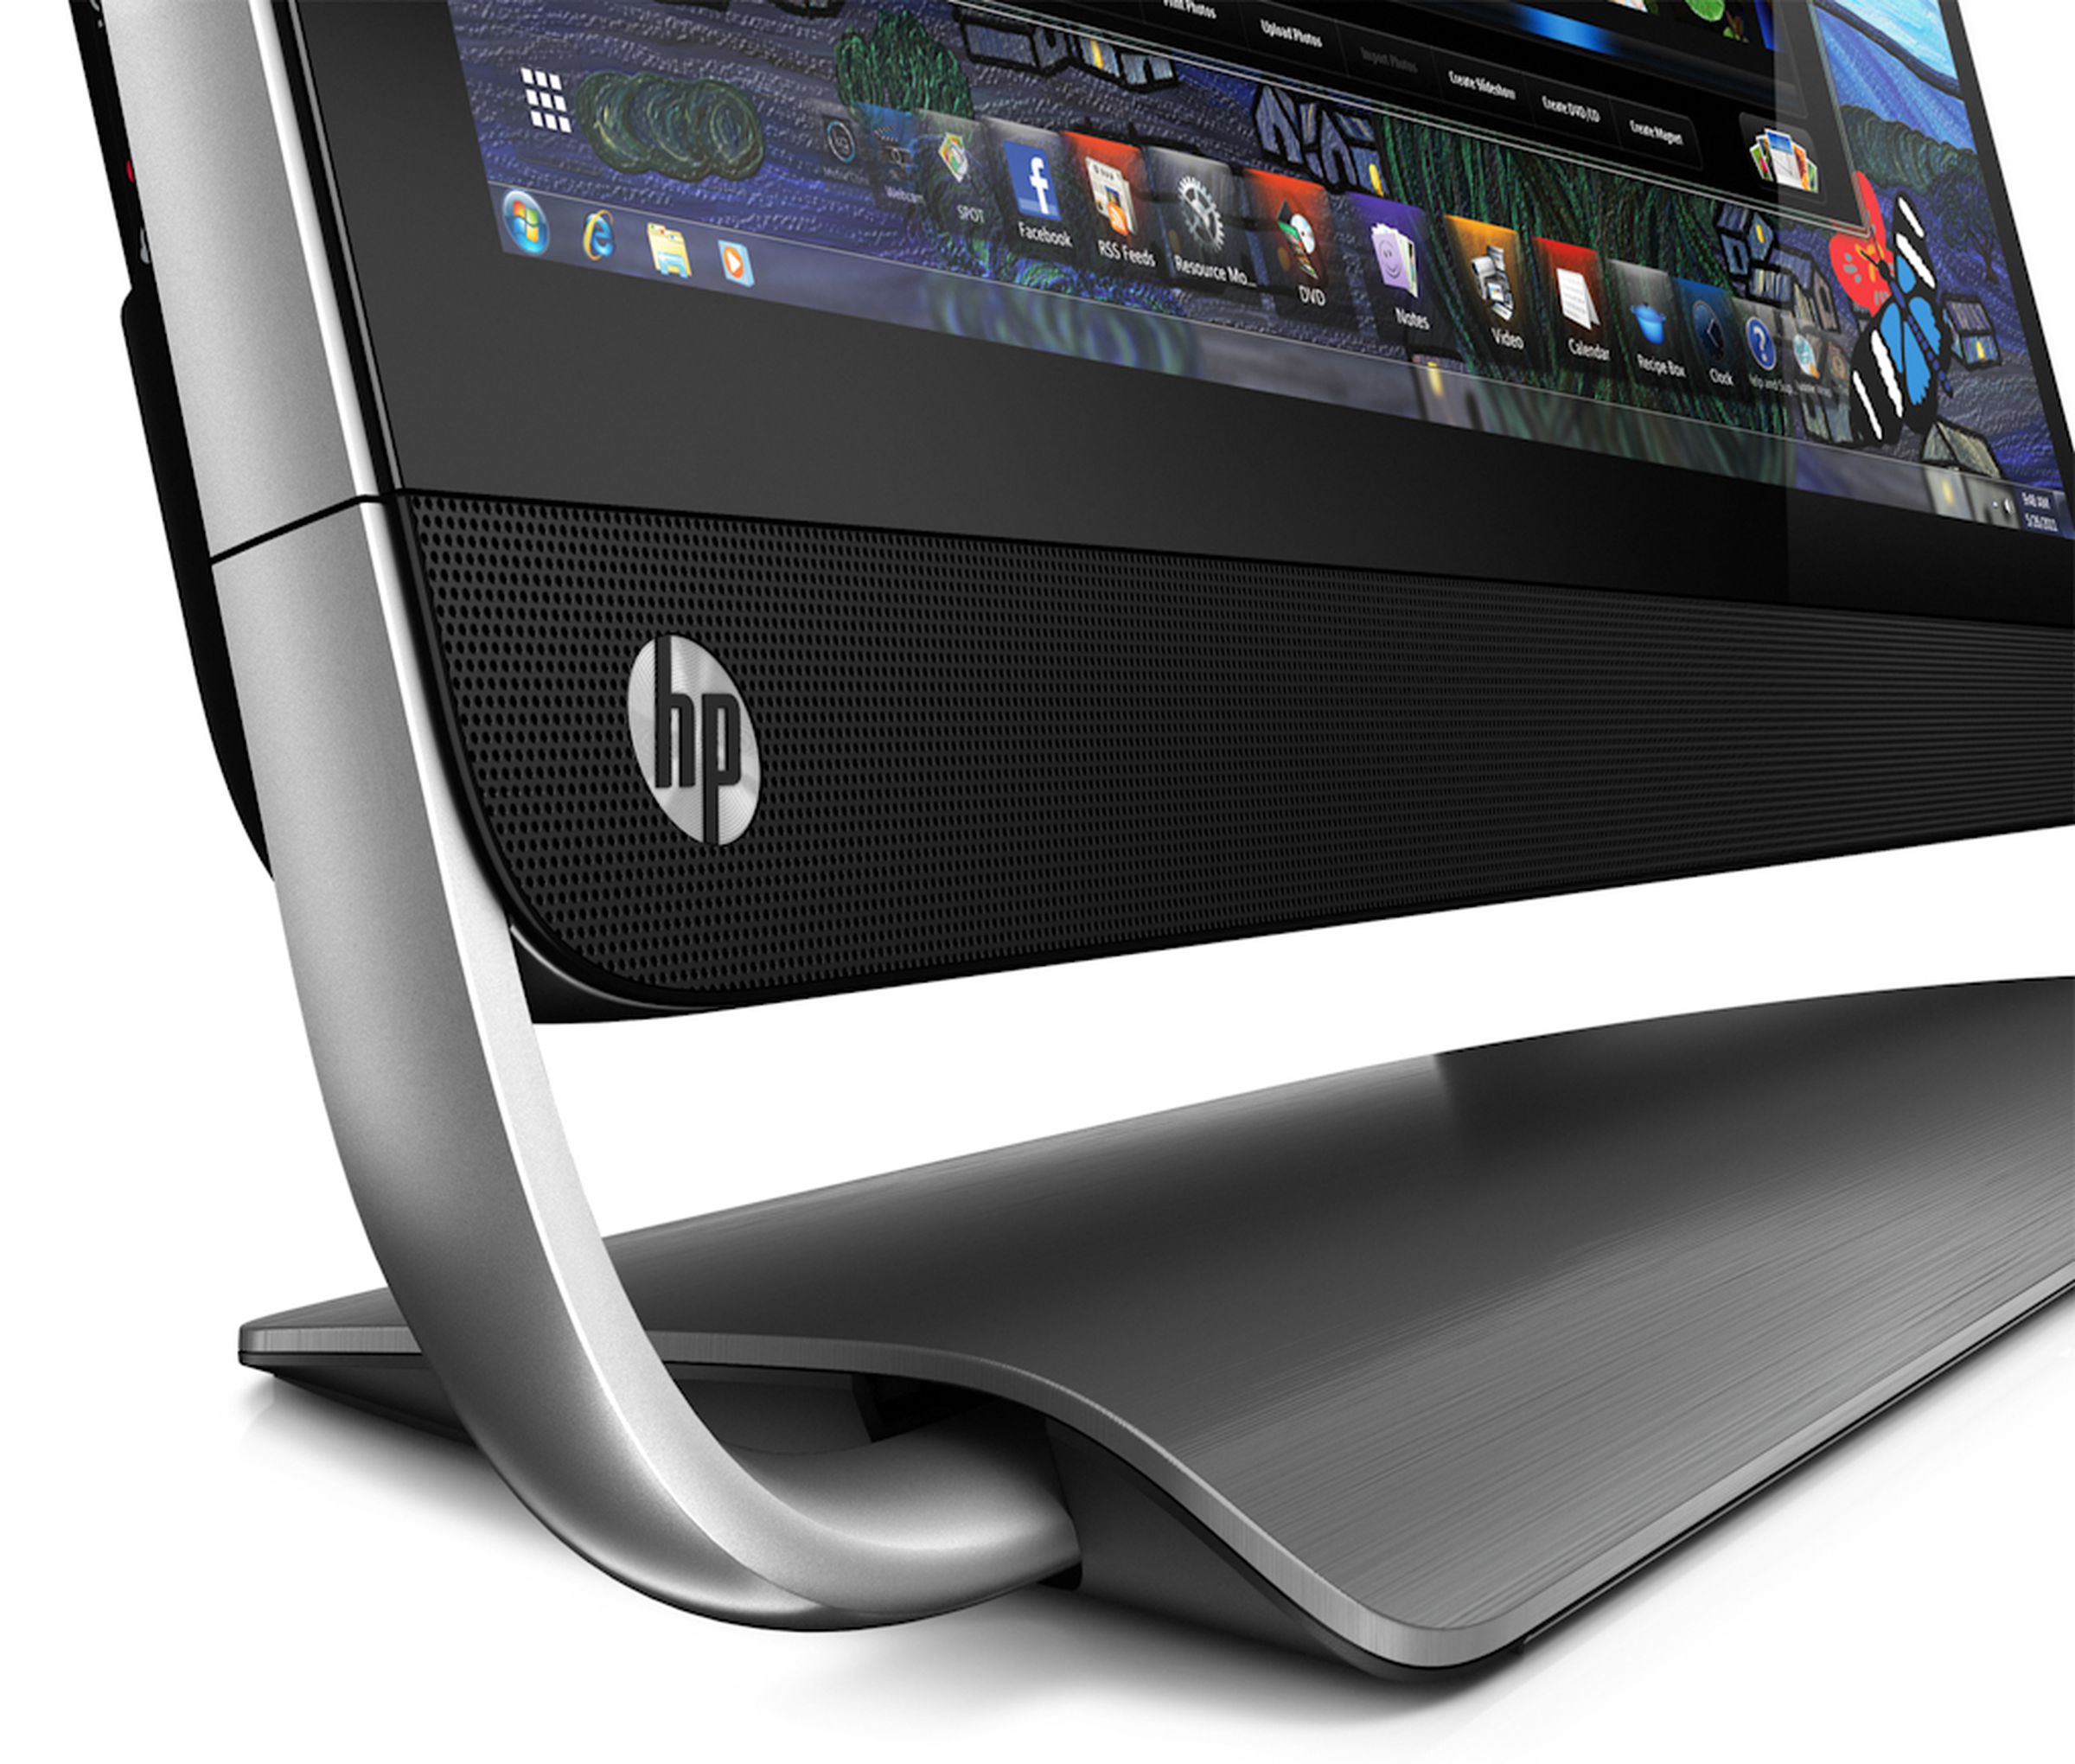 HP Omni 27 hands-on and press photos